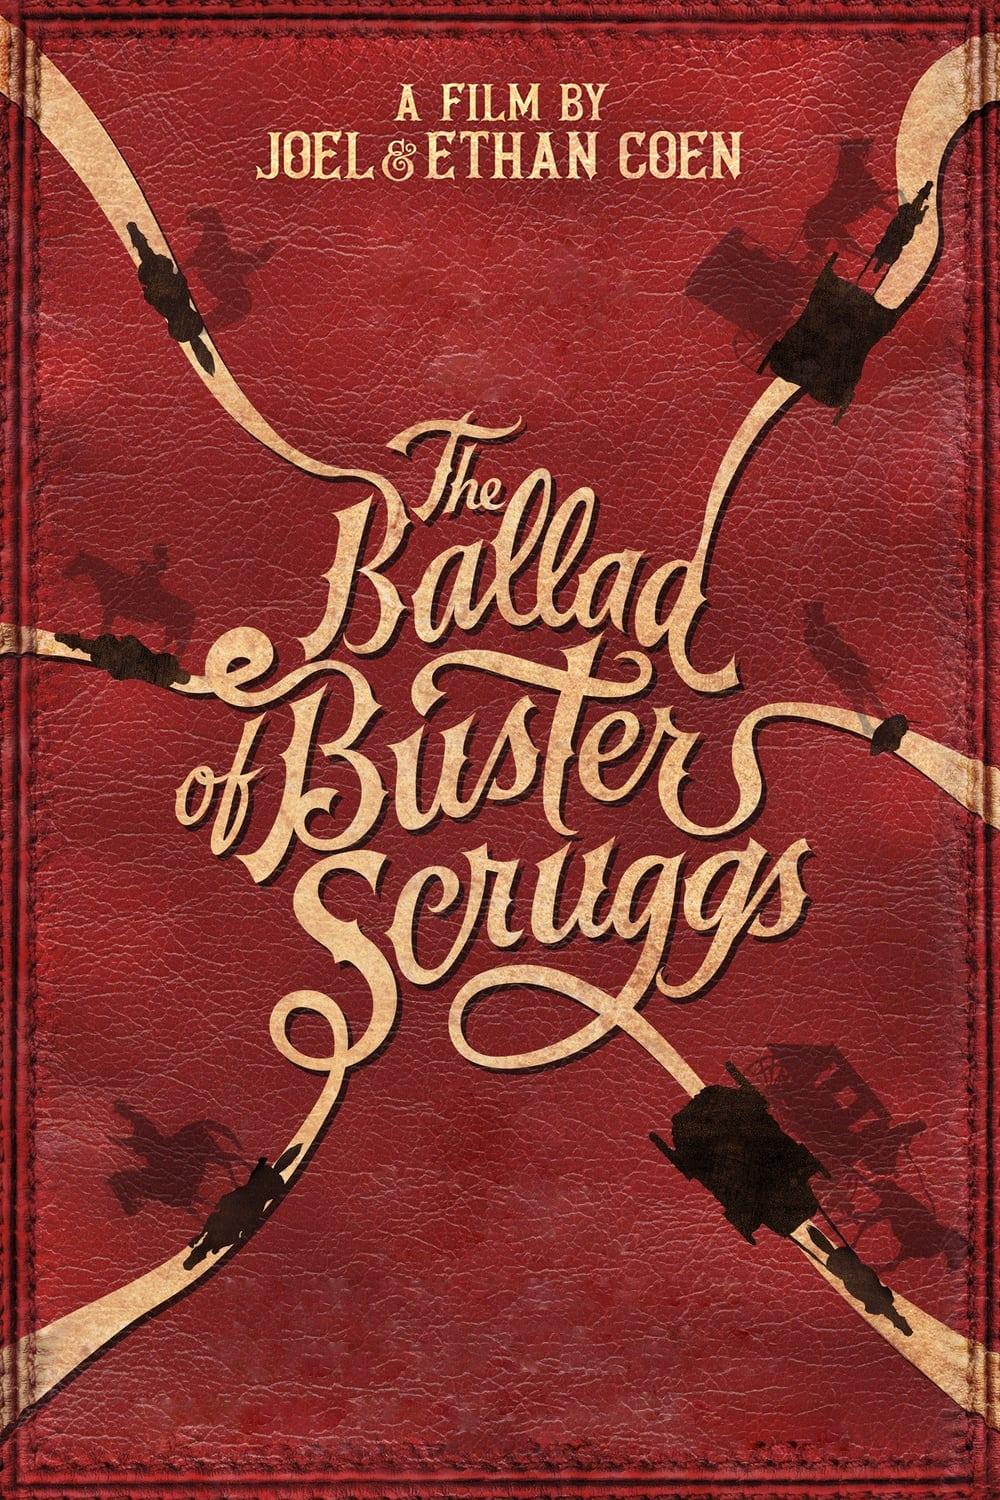 The Ballad of Buster Scruggs poster